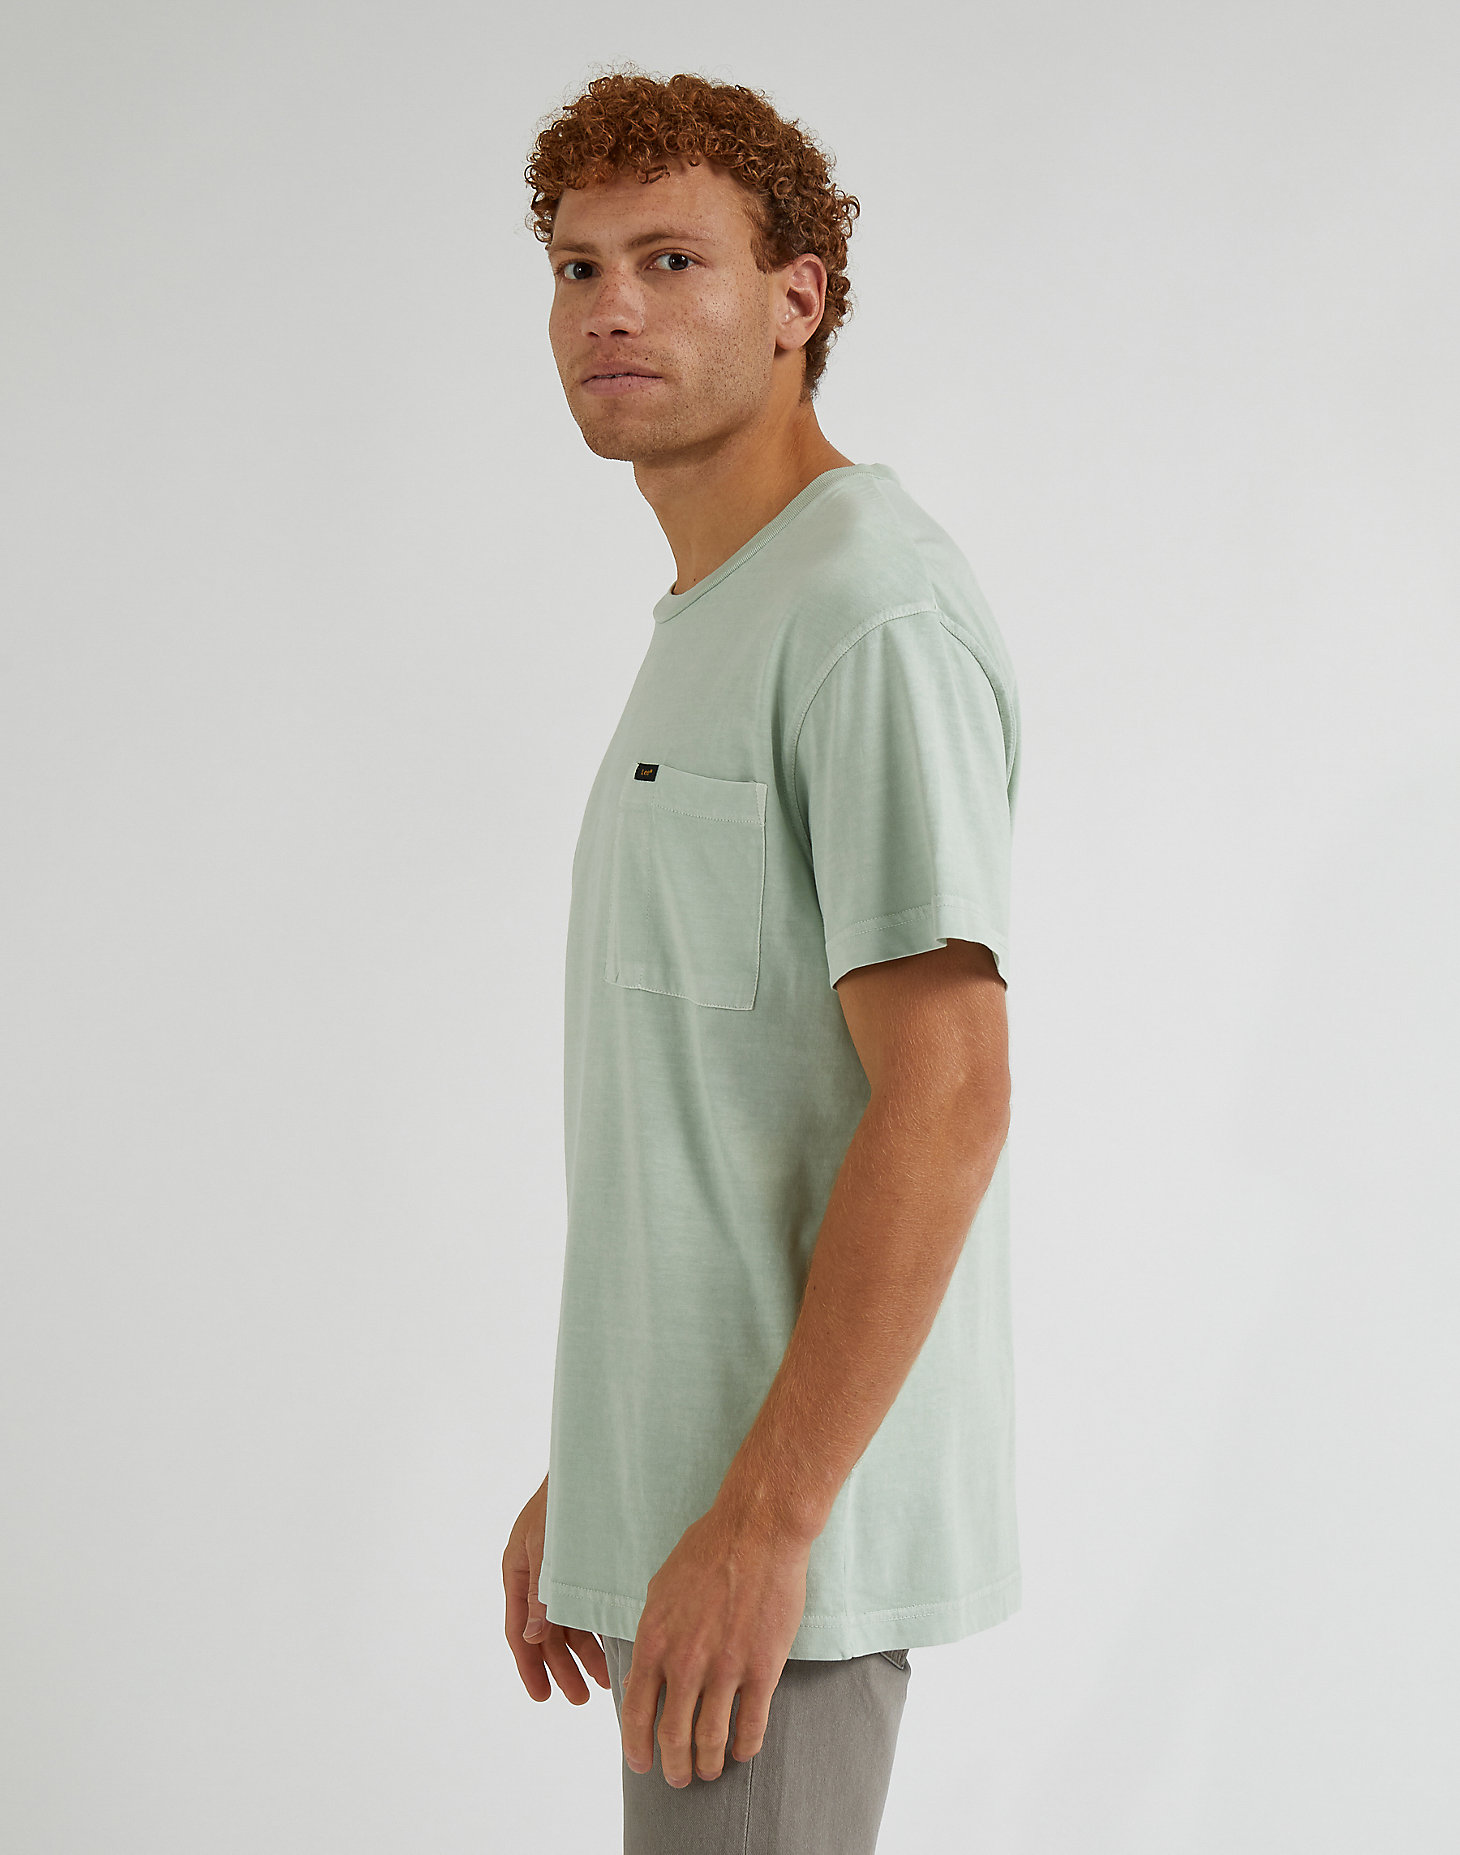 Relaxed Pocket Tee in Dusty Jade alternative view 3